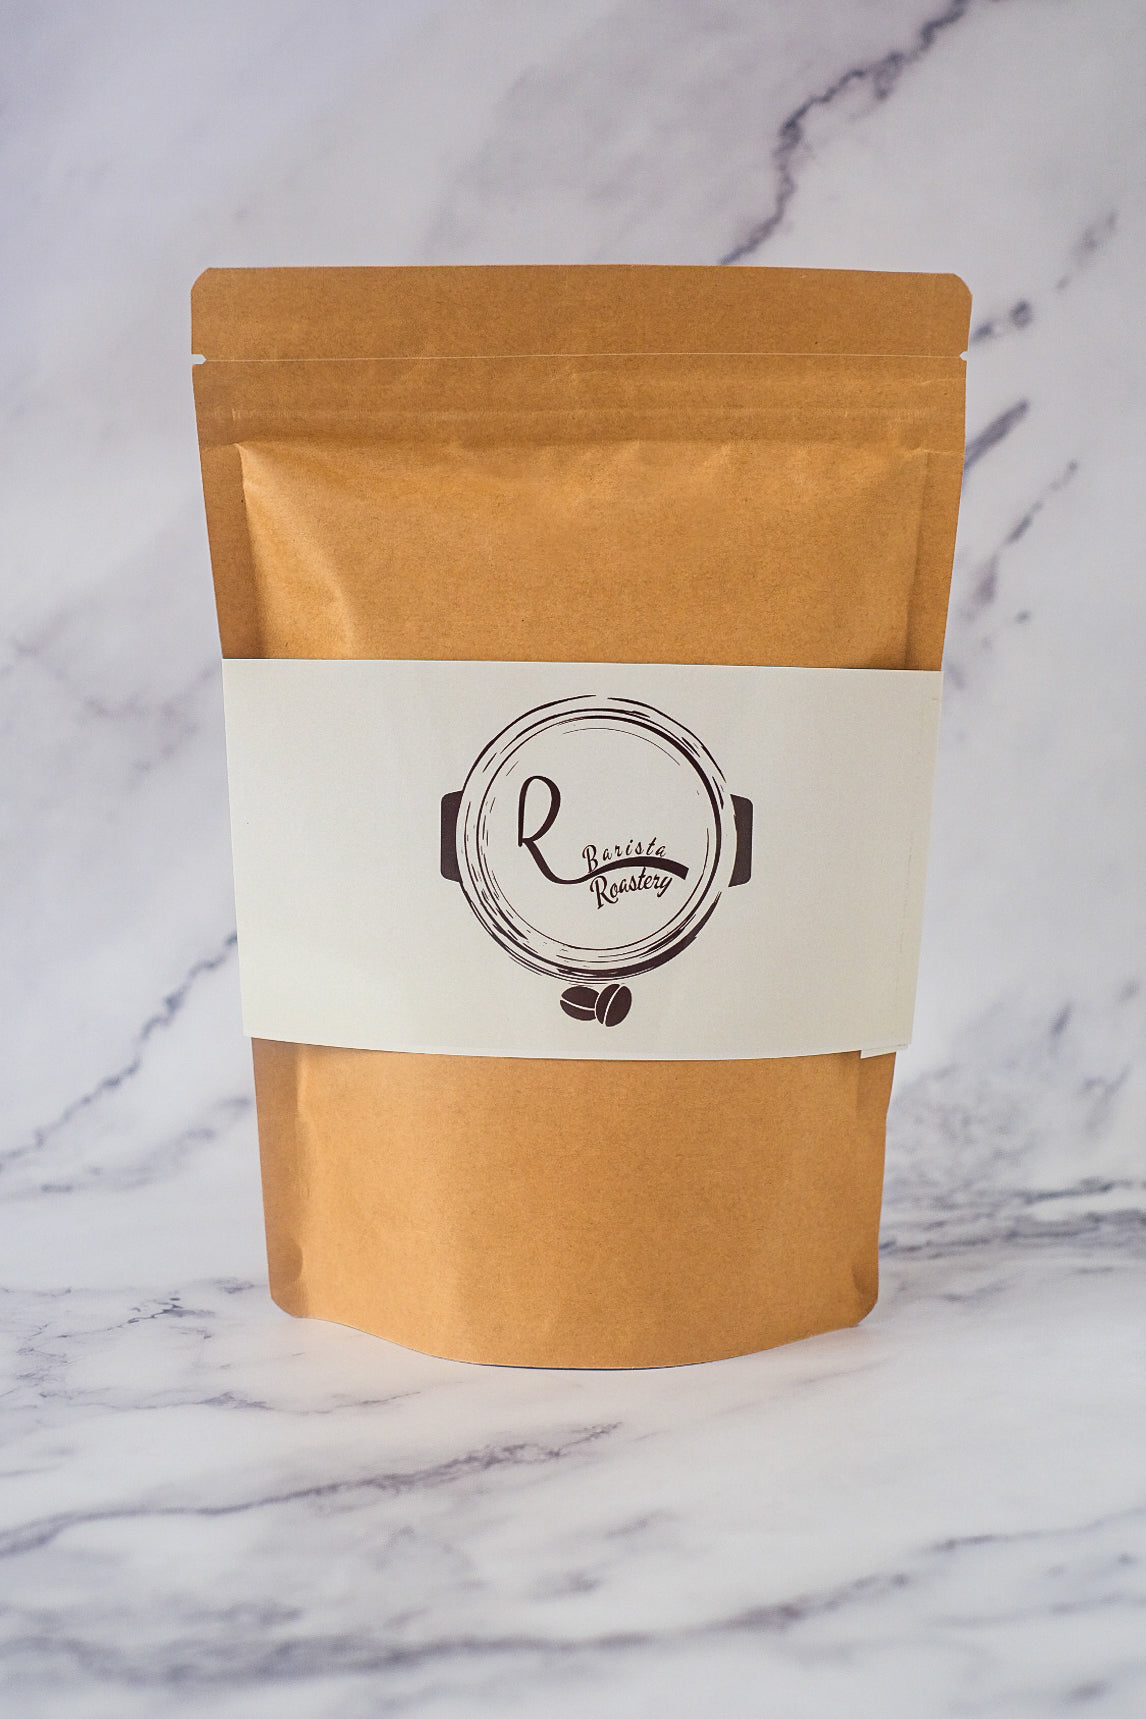 Roasted Coffee Beans - Colombia 250g - Rista Barista Roastery